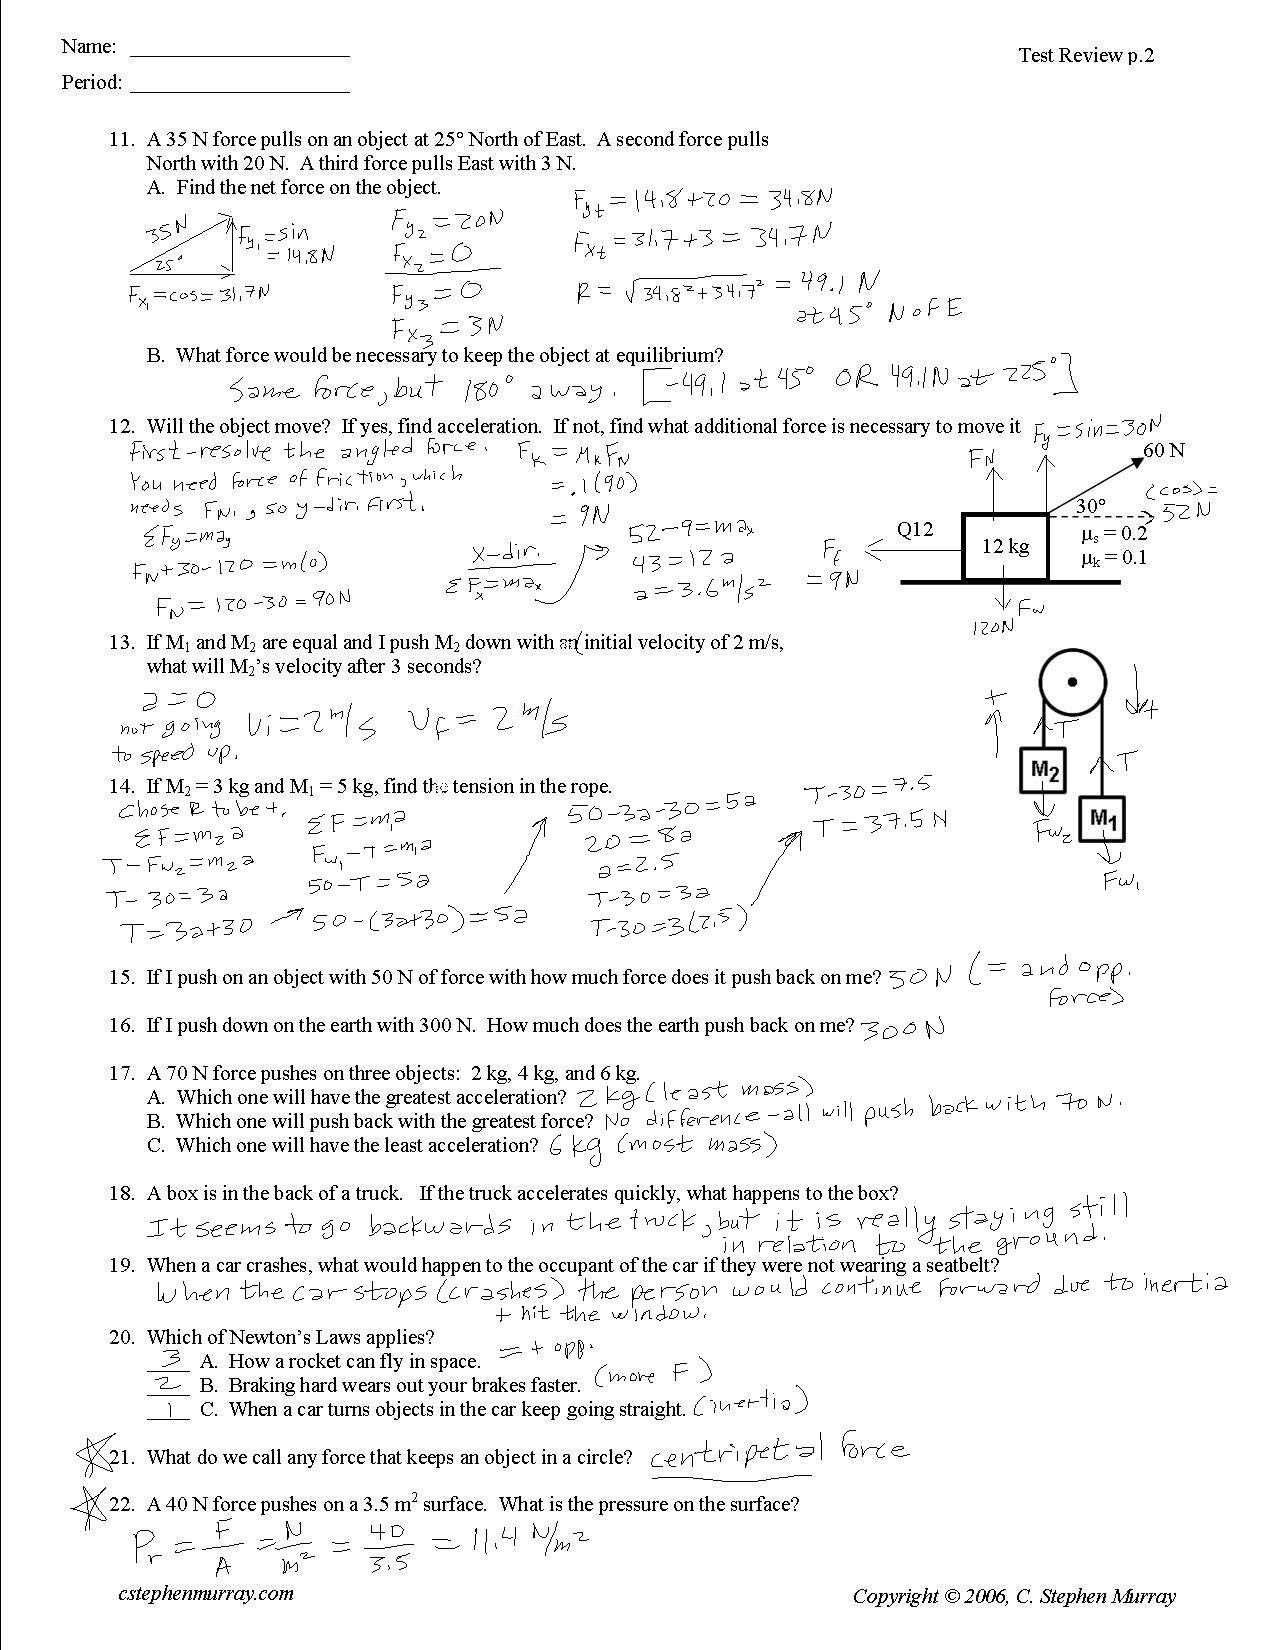 Acceleration Worksheet Answer Key Along with force and Motion Review Worksheets the Best Worksheets Image